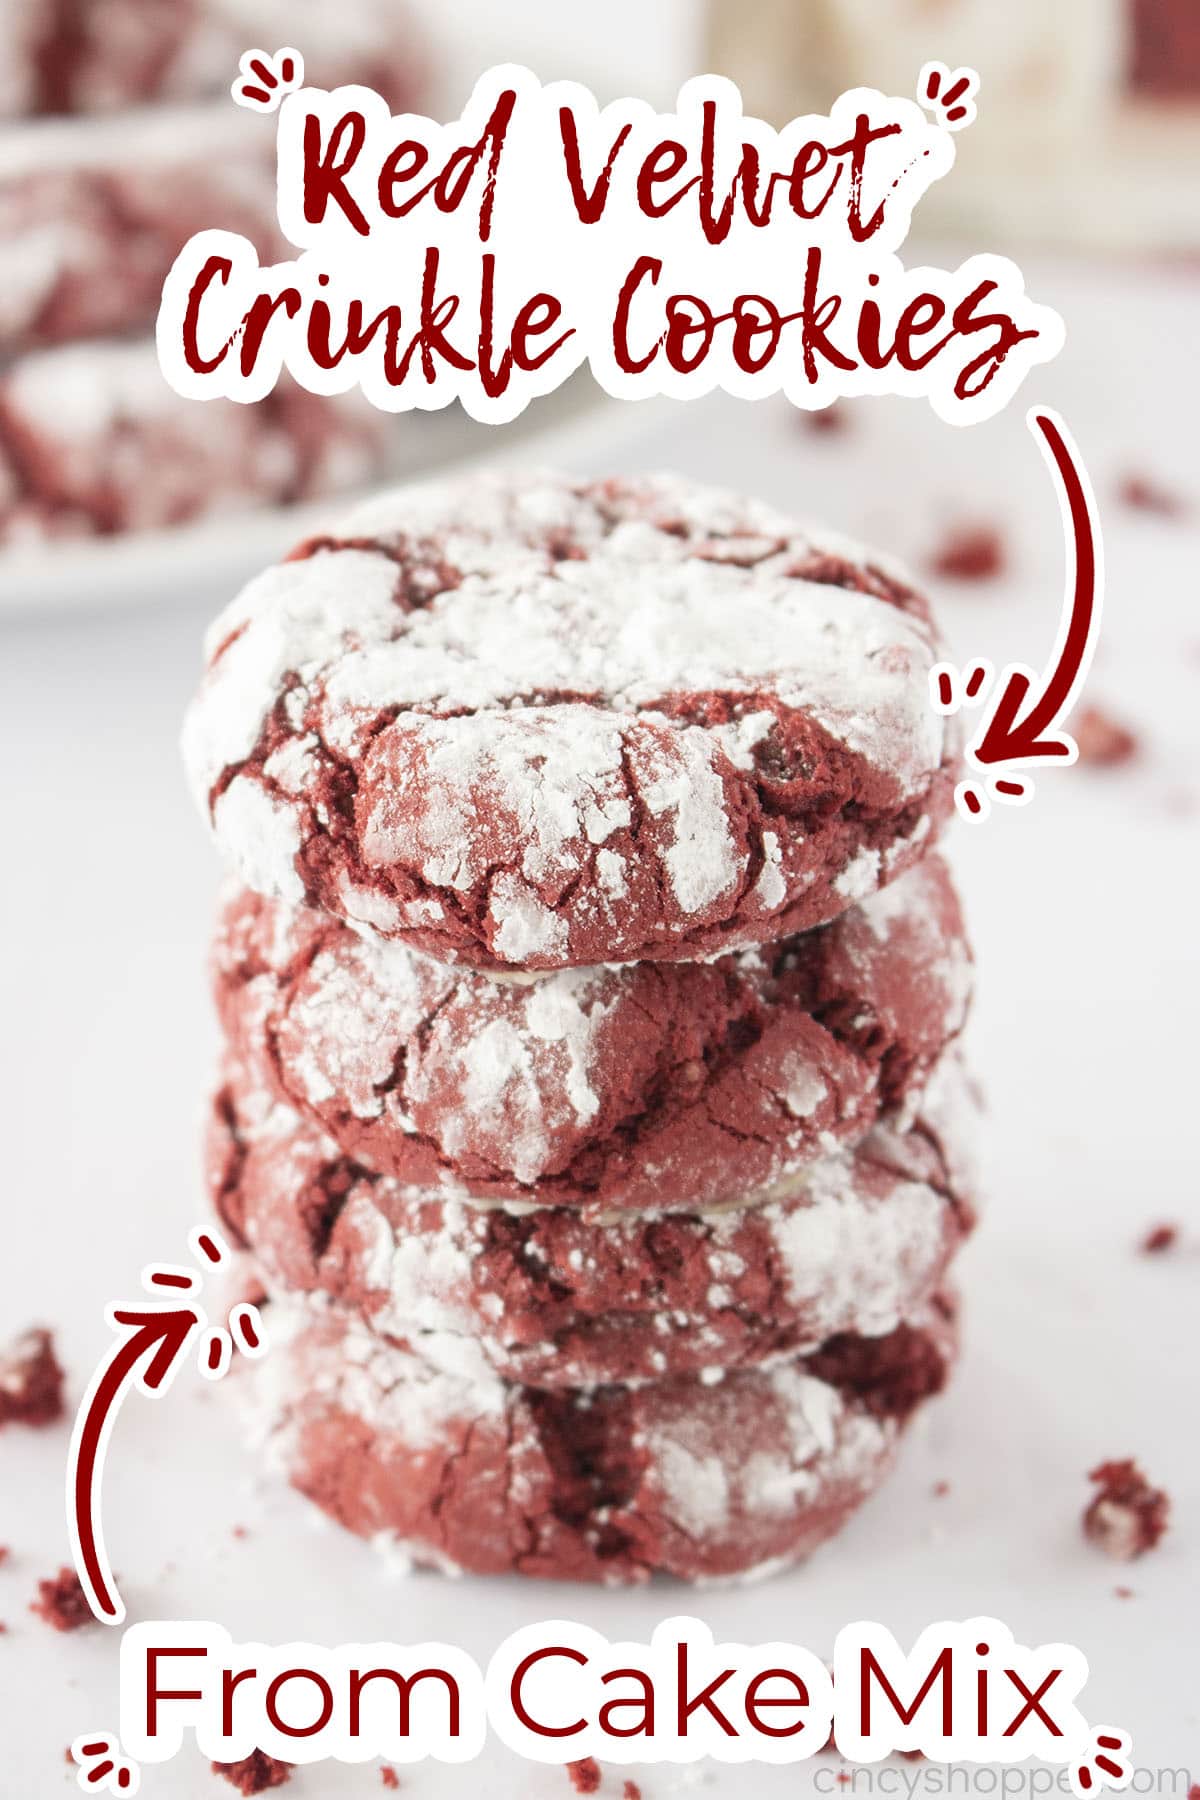 Text on image Red Velvet Crinkle Cookies from boxed cake mix.